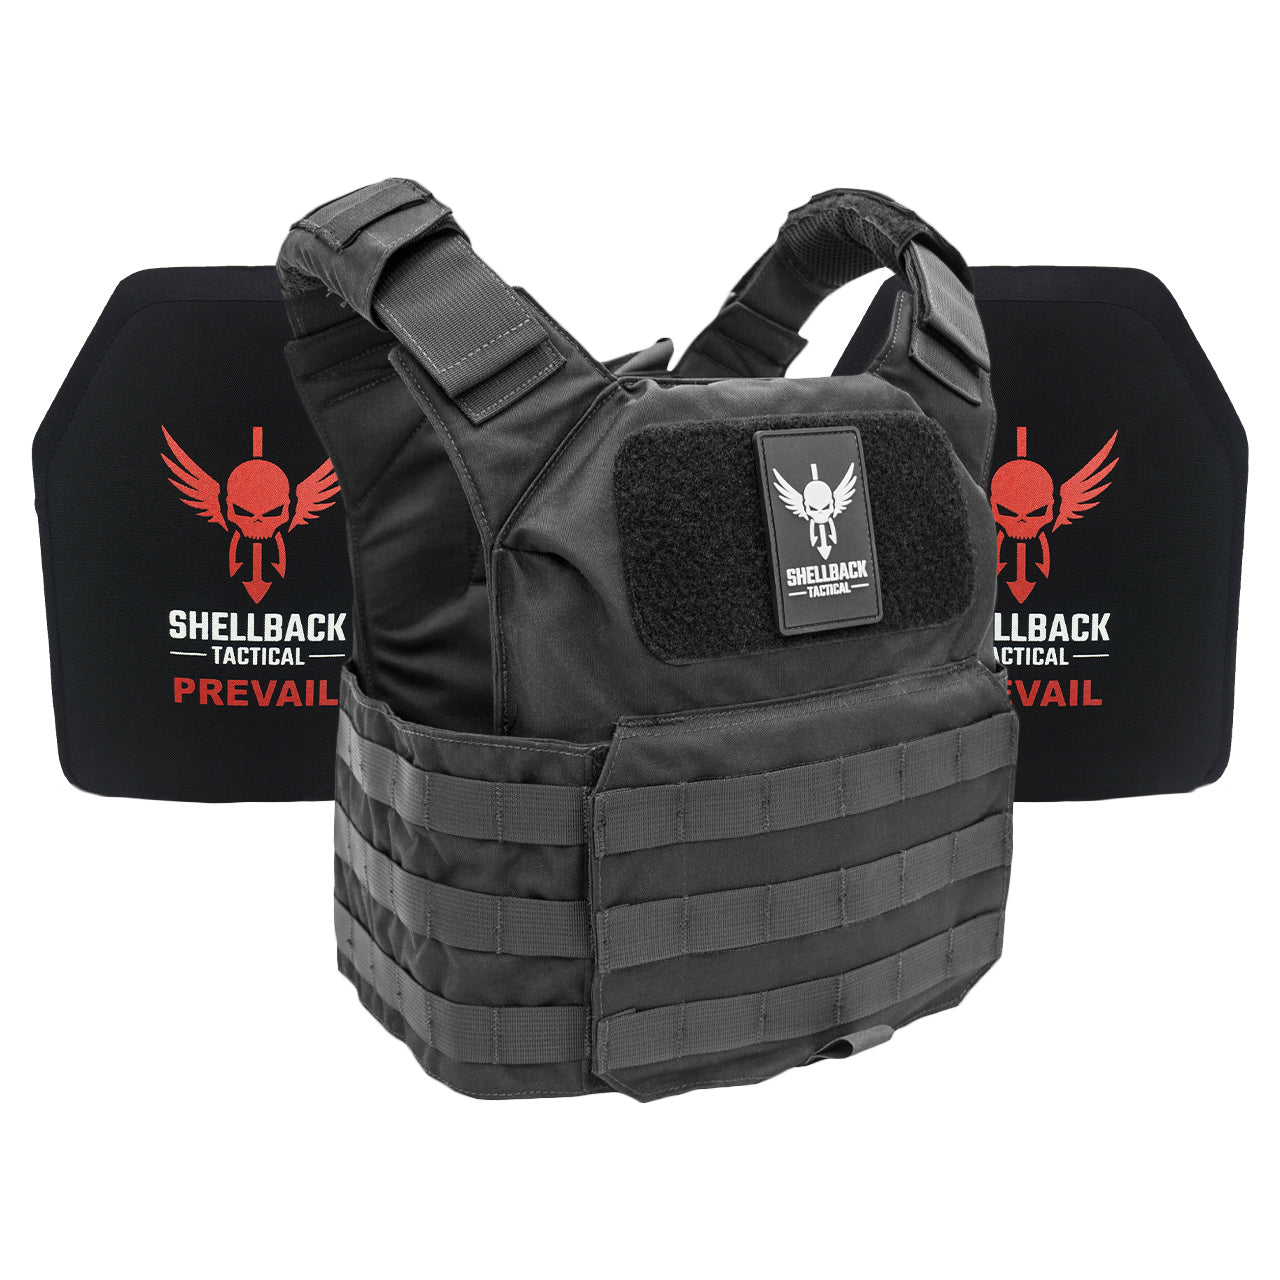 A Shellback Tactical Patriot Active Shooter Kit with Level IV Model 1155 Armor Plates Ranger Green vest with a red and black logo on it.